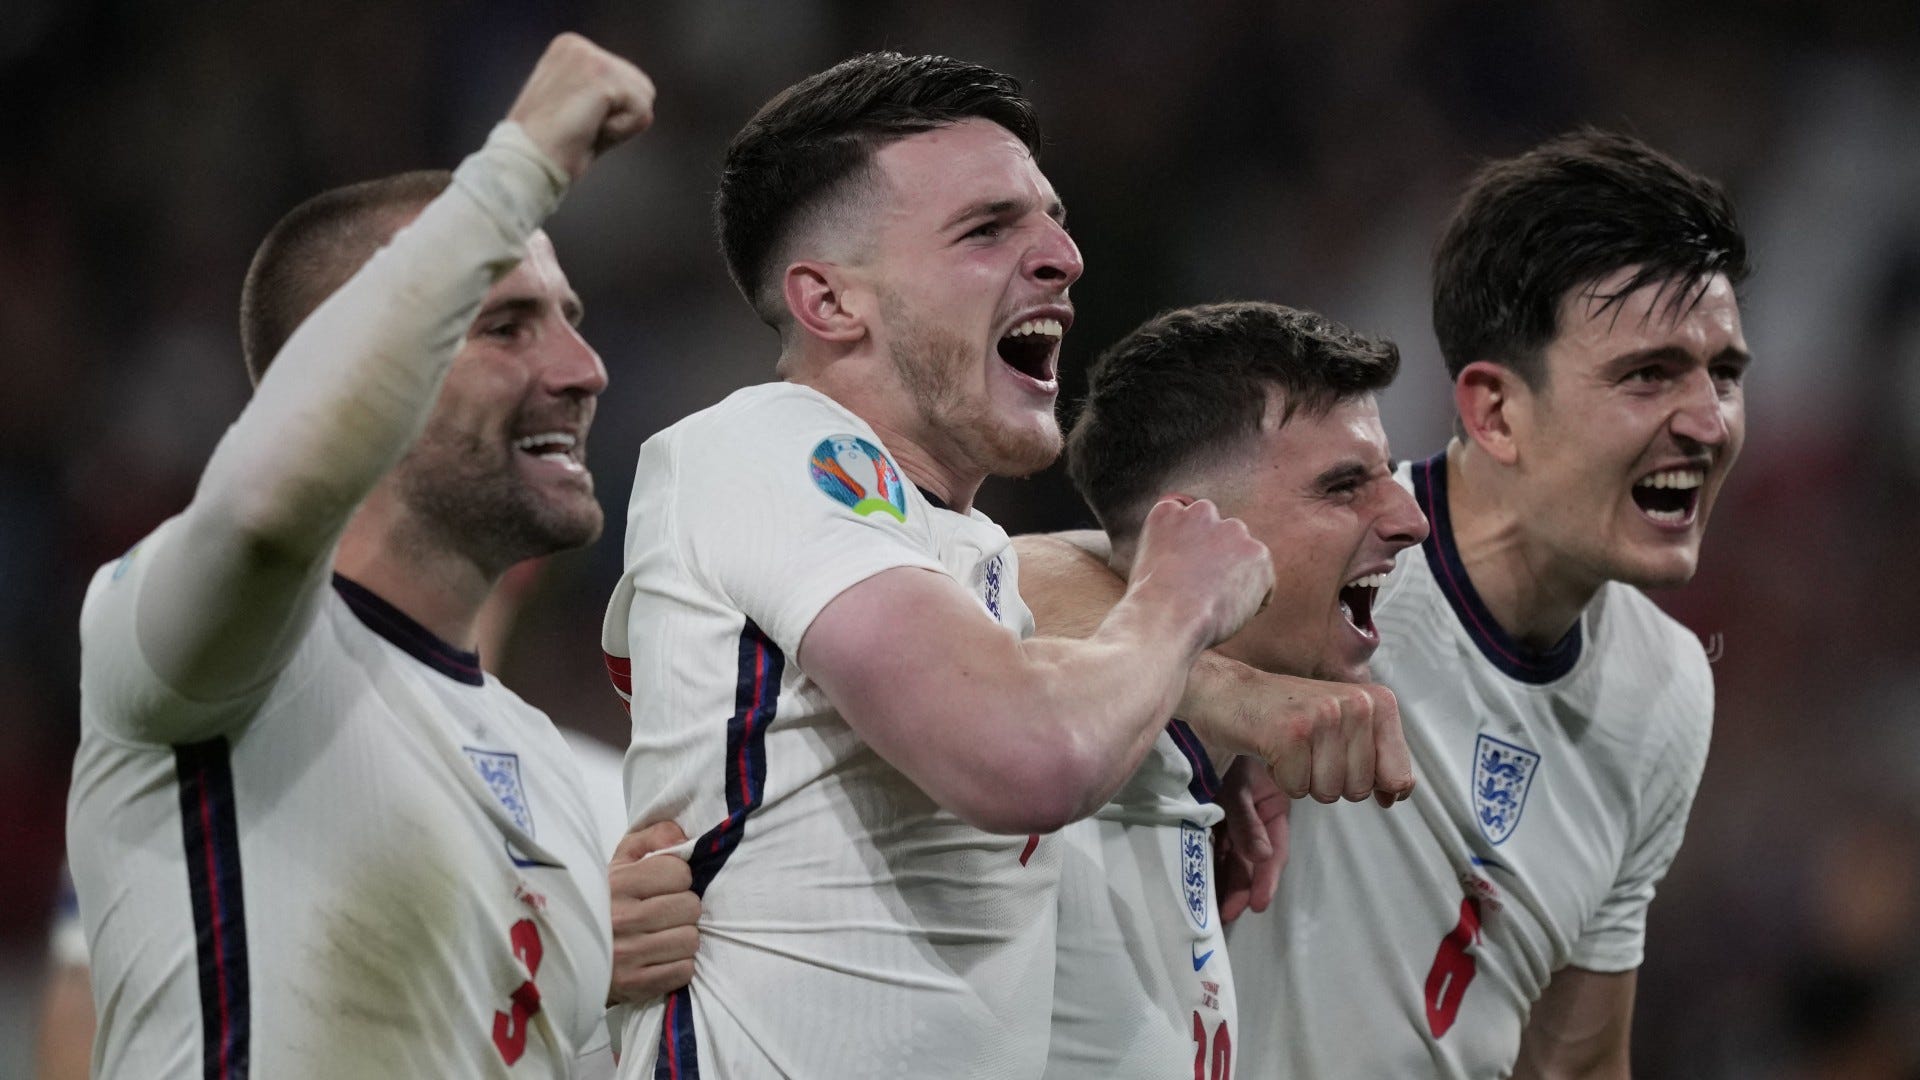 England fixtures 2022: Schedule, results, groups, TV channel, live stream & squad - Goal.com